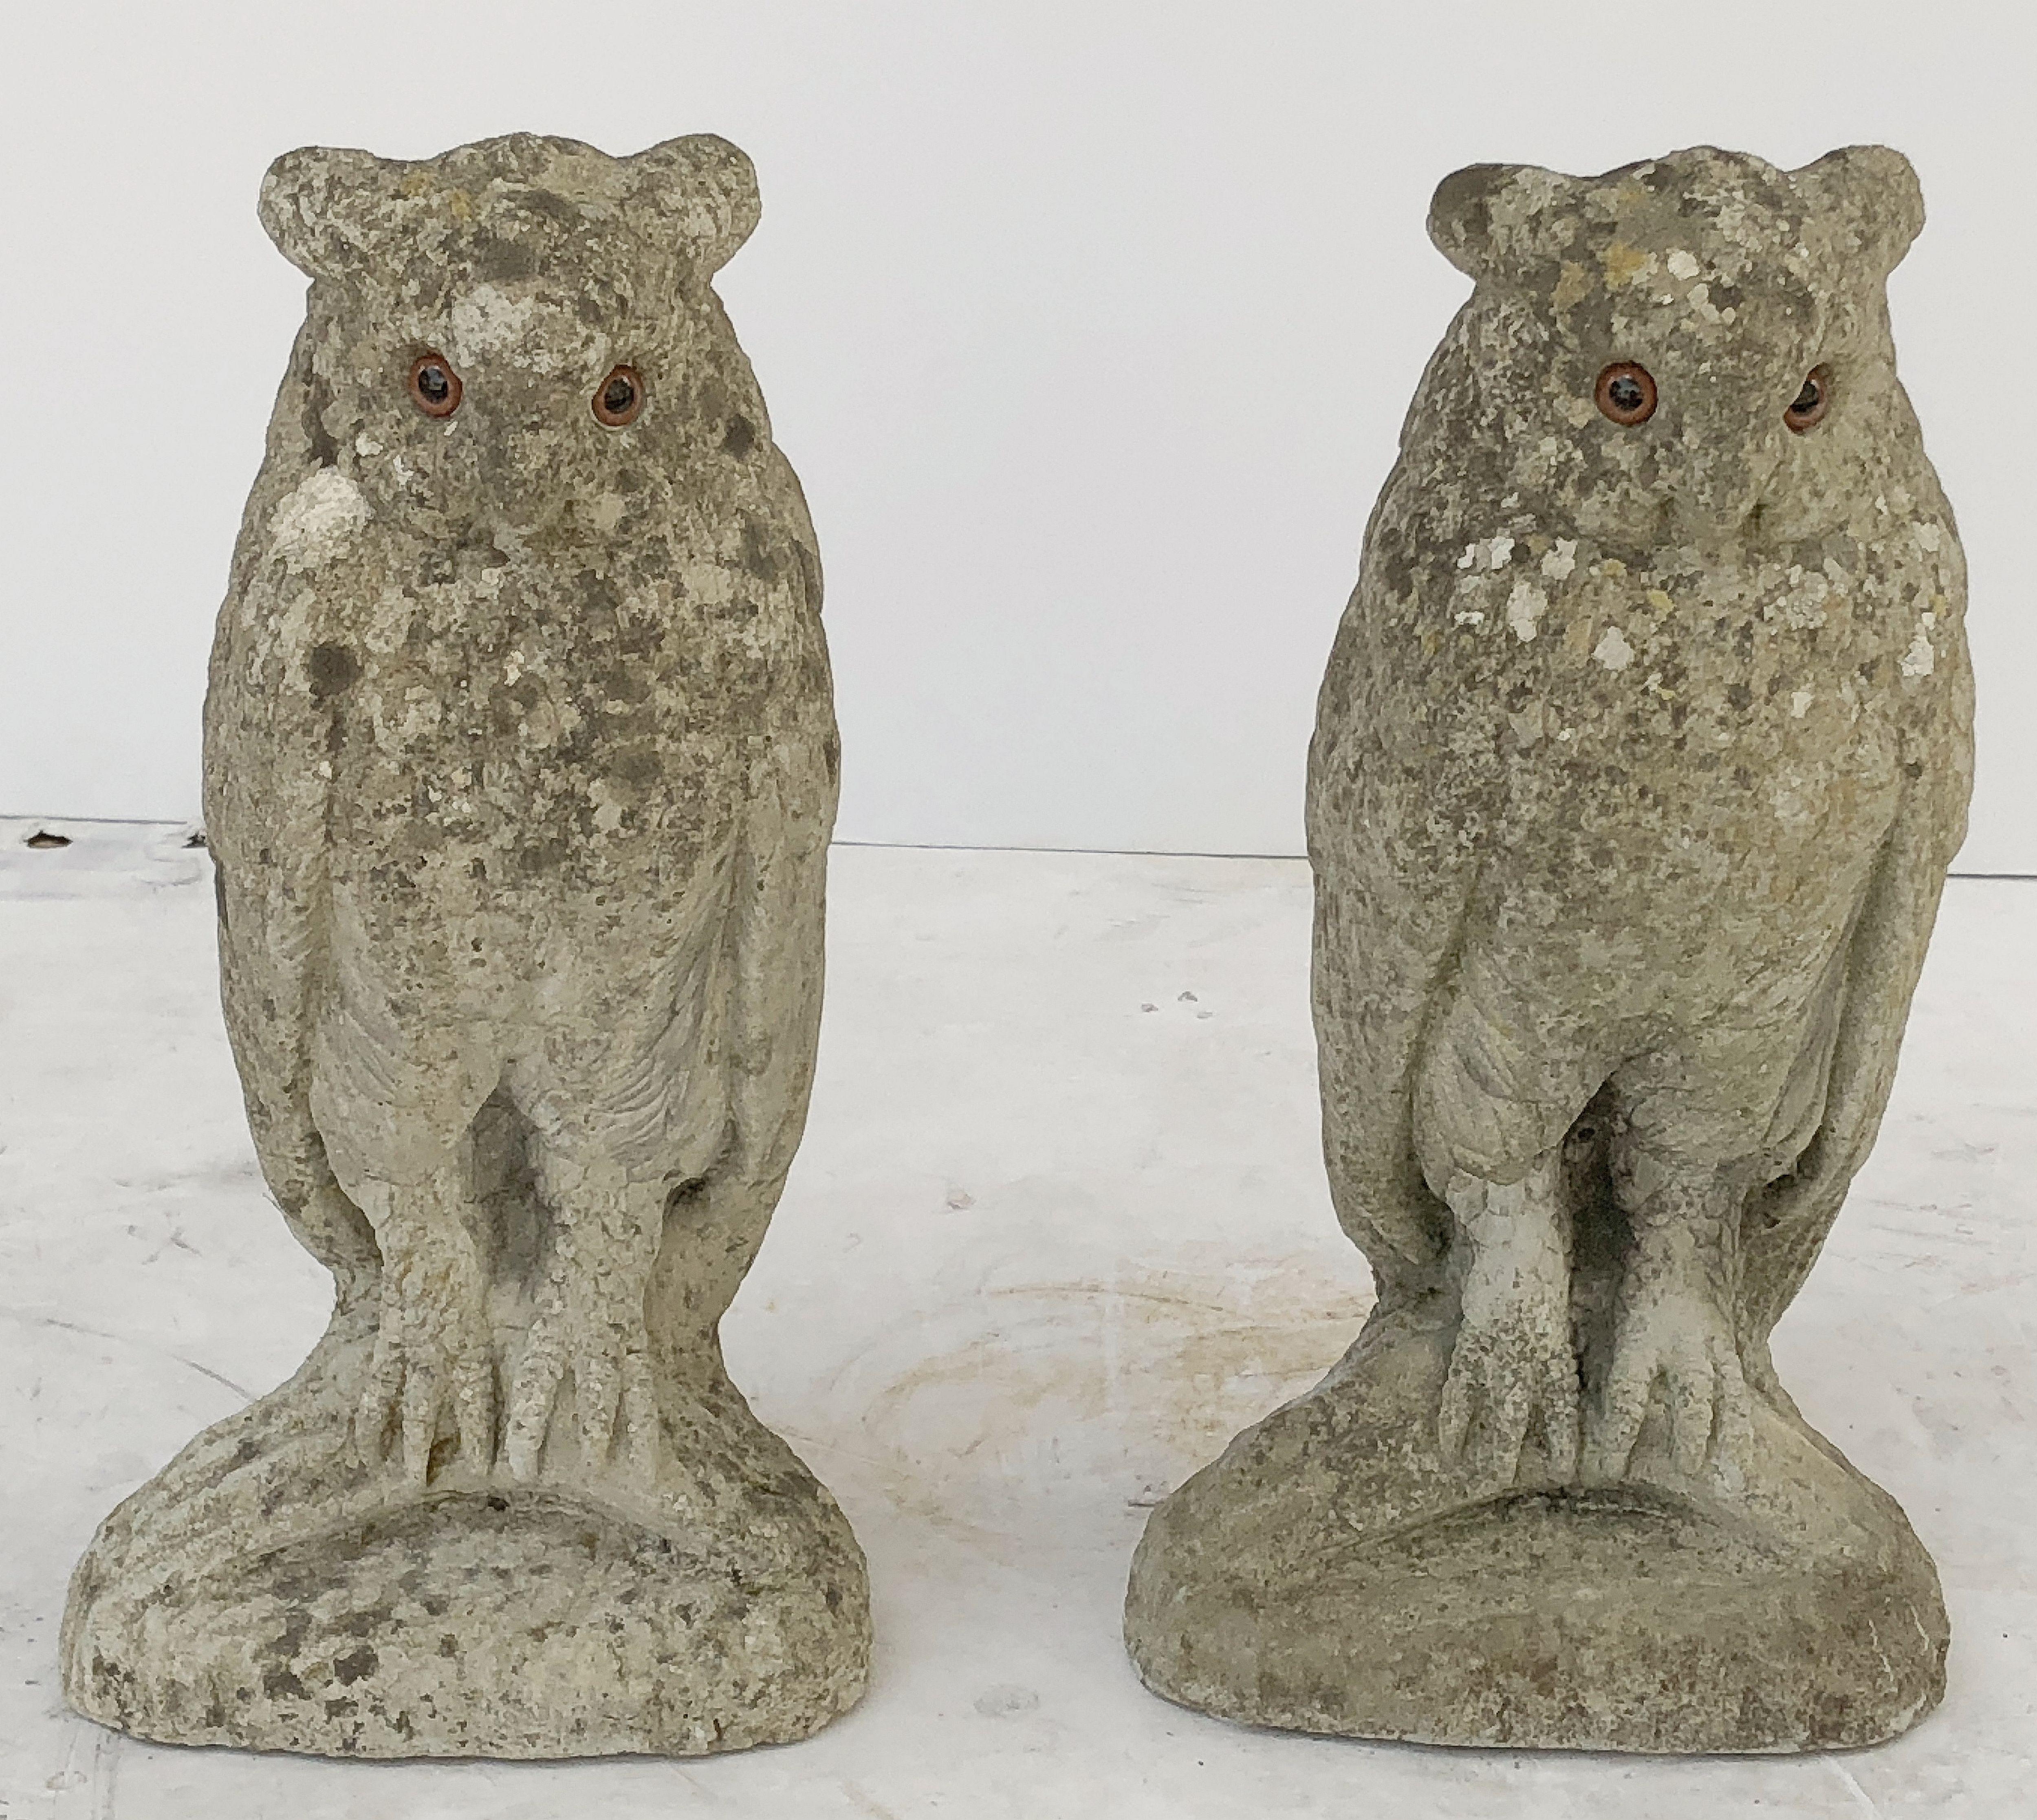 large outdoor owl statue